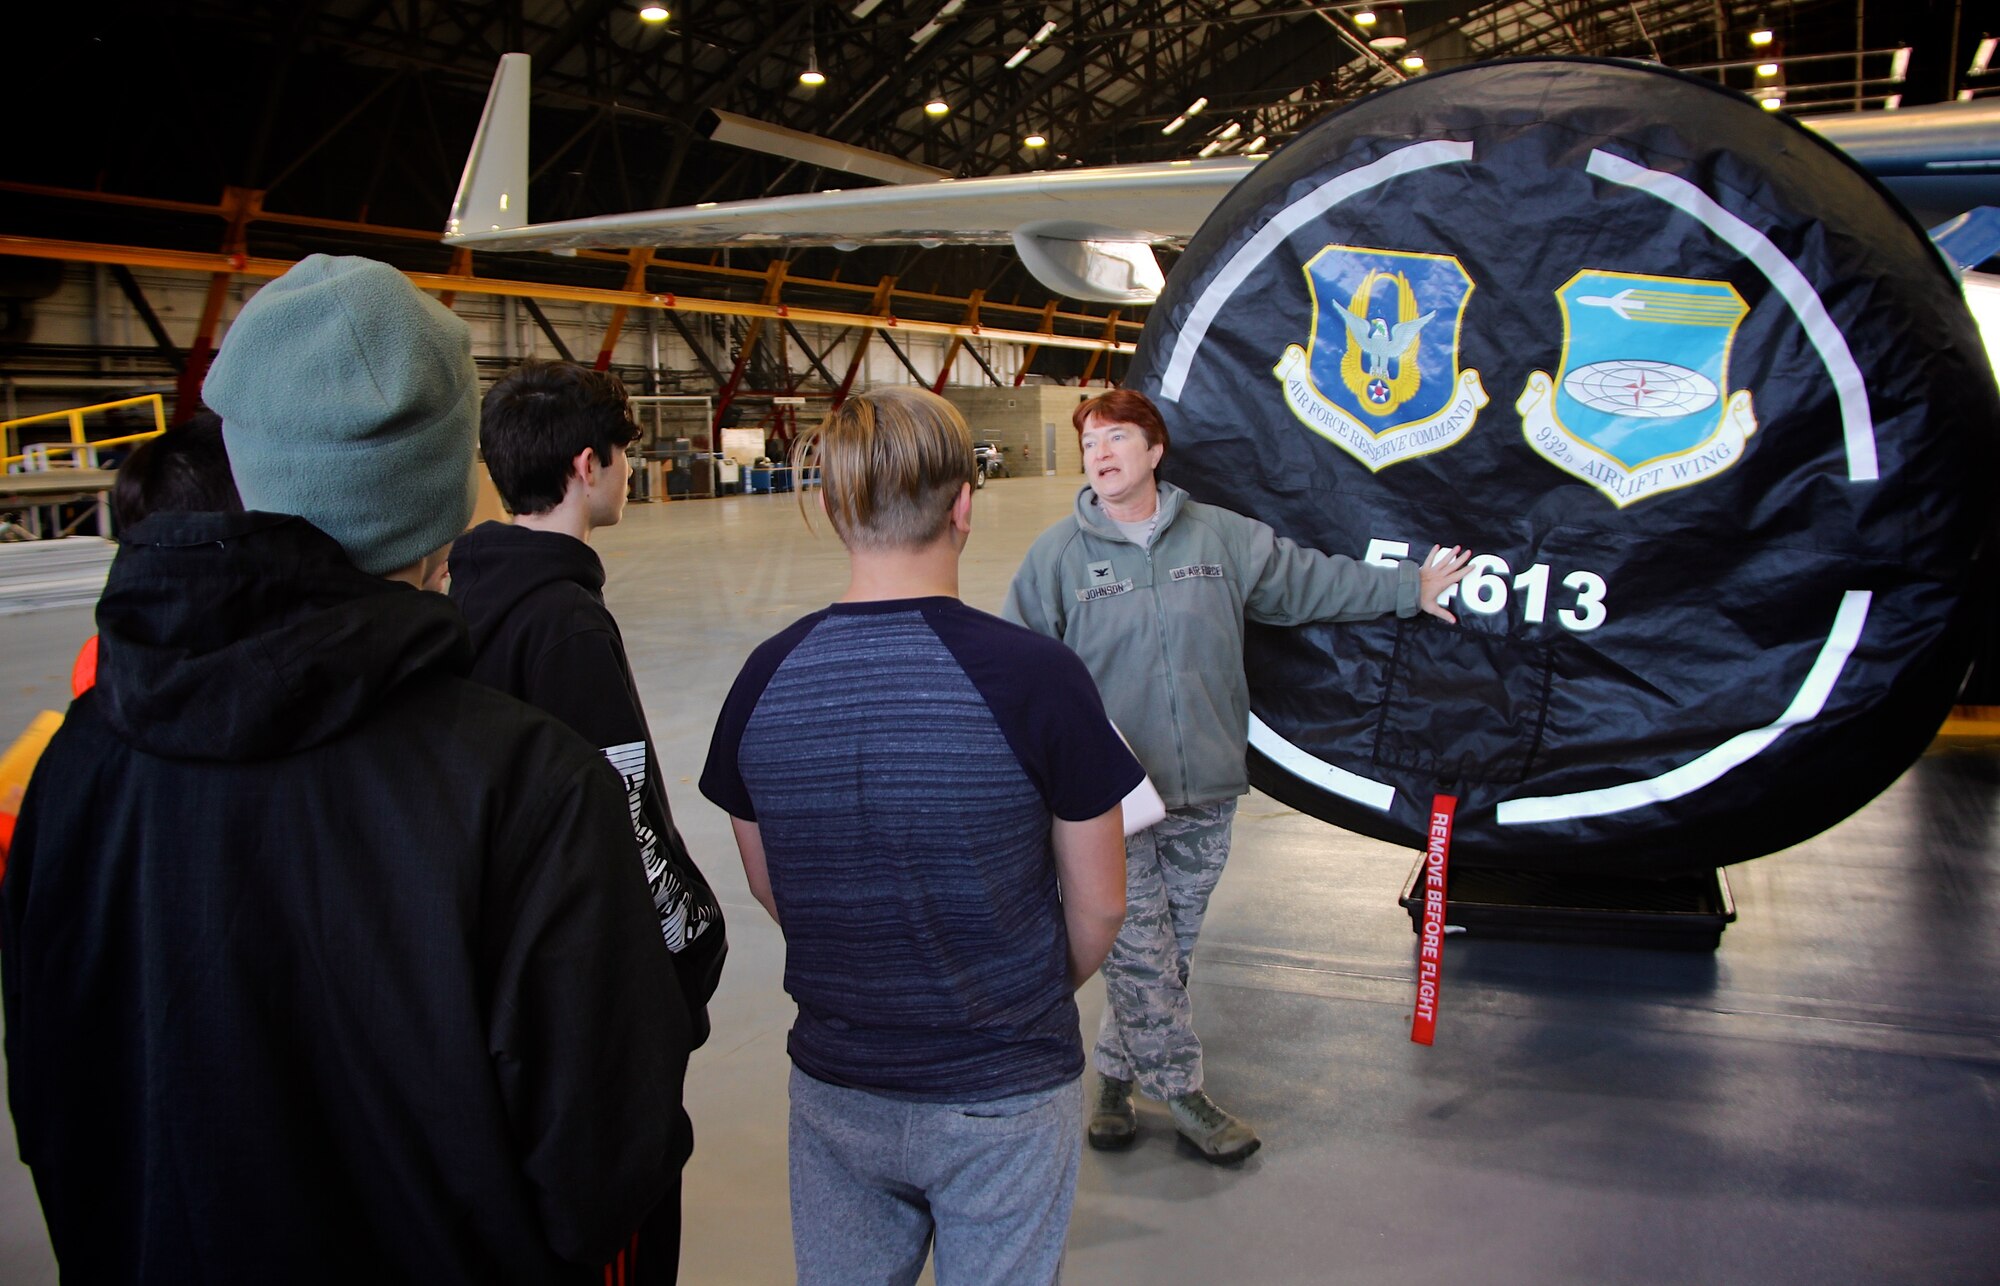 As part of a community outreach event, the 932nd Airlift Wing Maintenance Group's top officer and commander, Col. Sharon Johnson, talks about the C-40 plane, the Air Force Reserve and the 932nd Airlift Wing, to a group of eighth grade Science, Technology, Engineering, and Mathematics (STEM) students.  The students visited December 10, 2018, at Scott Air Force Base, Illinois. Johnson's group of Airmen maintain four of the C-40 aircraft belonging to the 932nd AW and operated by the 932nd Operations Group and updated by the 932nd Maintenance Group.  She and the public affairs officer escorted local Mascoutah students out to their hangar work center, to see more about how an airplane engine, wheels, tires, hydraulics, and wings work together and get a plane off the ground. Johnson and her maintainers manned informational stations as multiple groups of students rotated through various areas every 45 minutes at the reserve unit, located in southern Illinois near Belleville. (U.S. Air Force photo by Lt. Col. Stan Paregien)